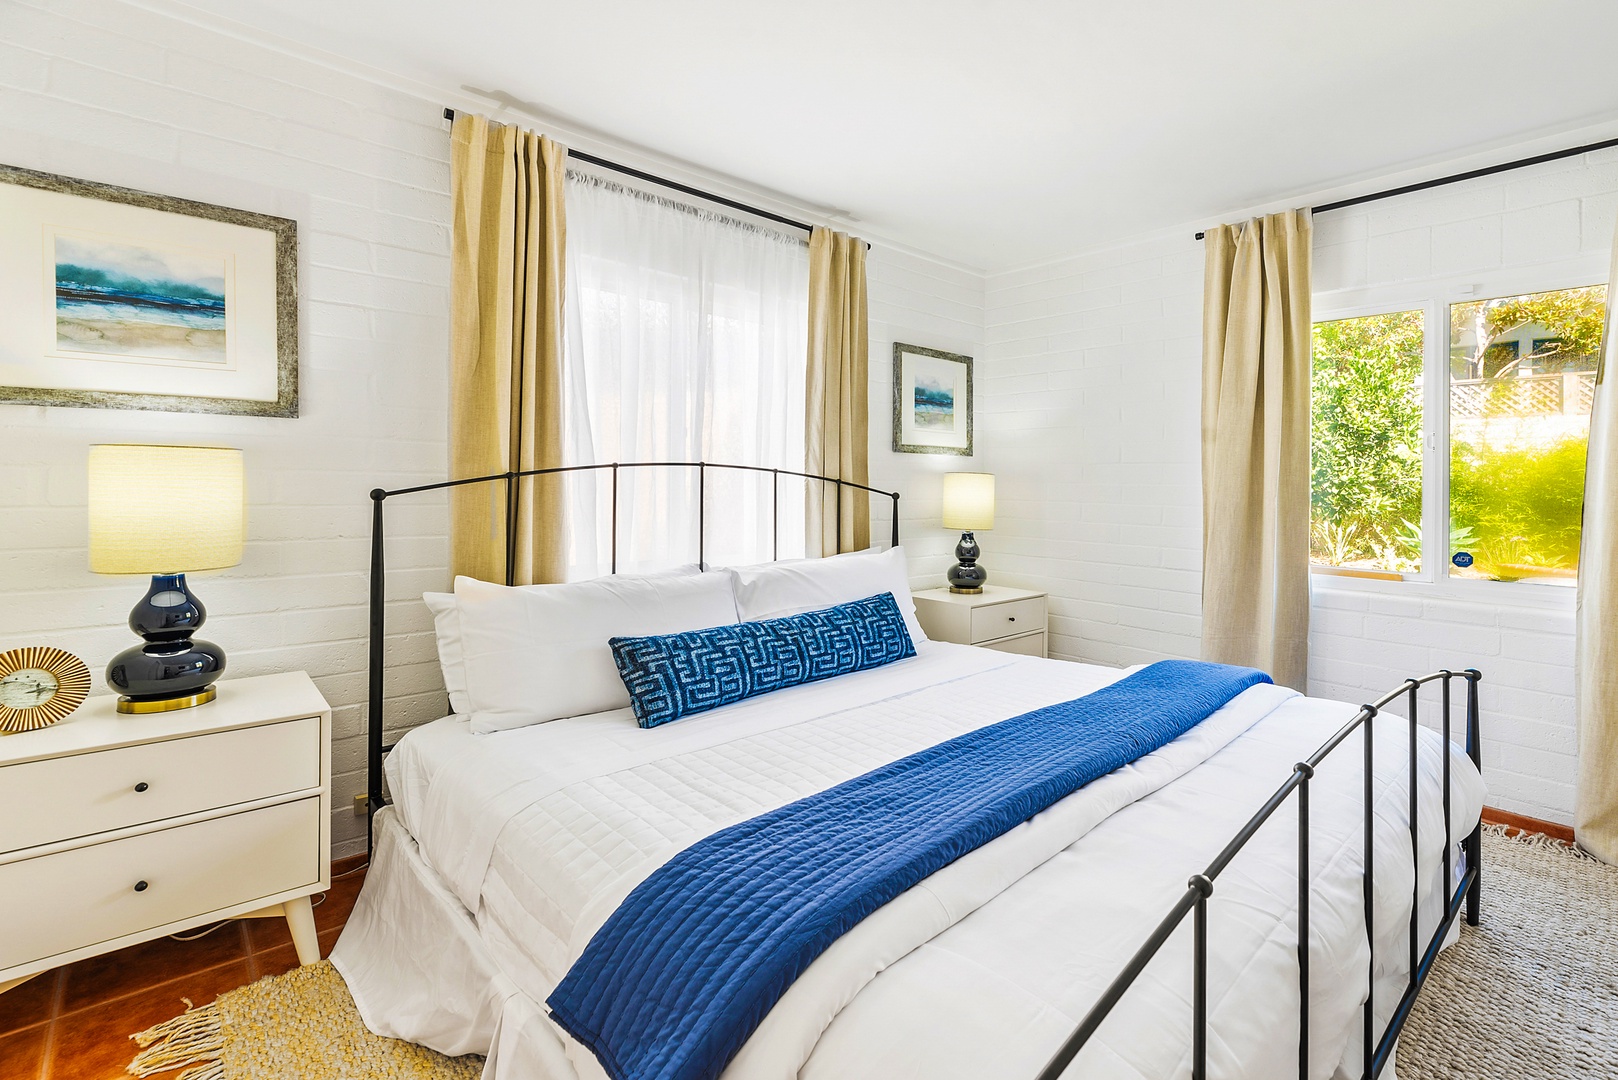 La Jolla Vacation Rentals, Hemingway's Beach House - Primary bedroom with king bed